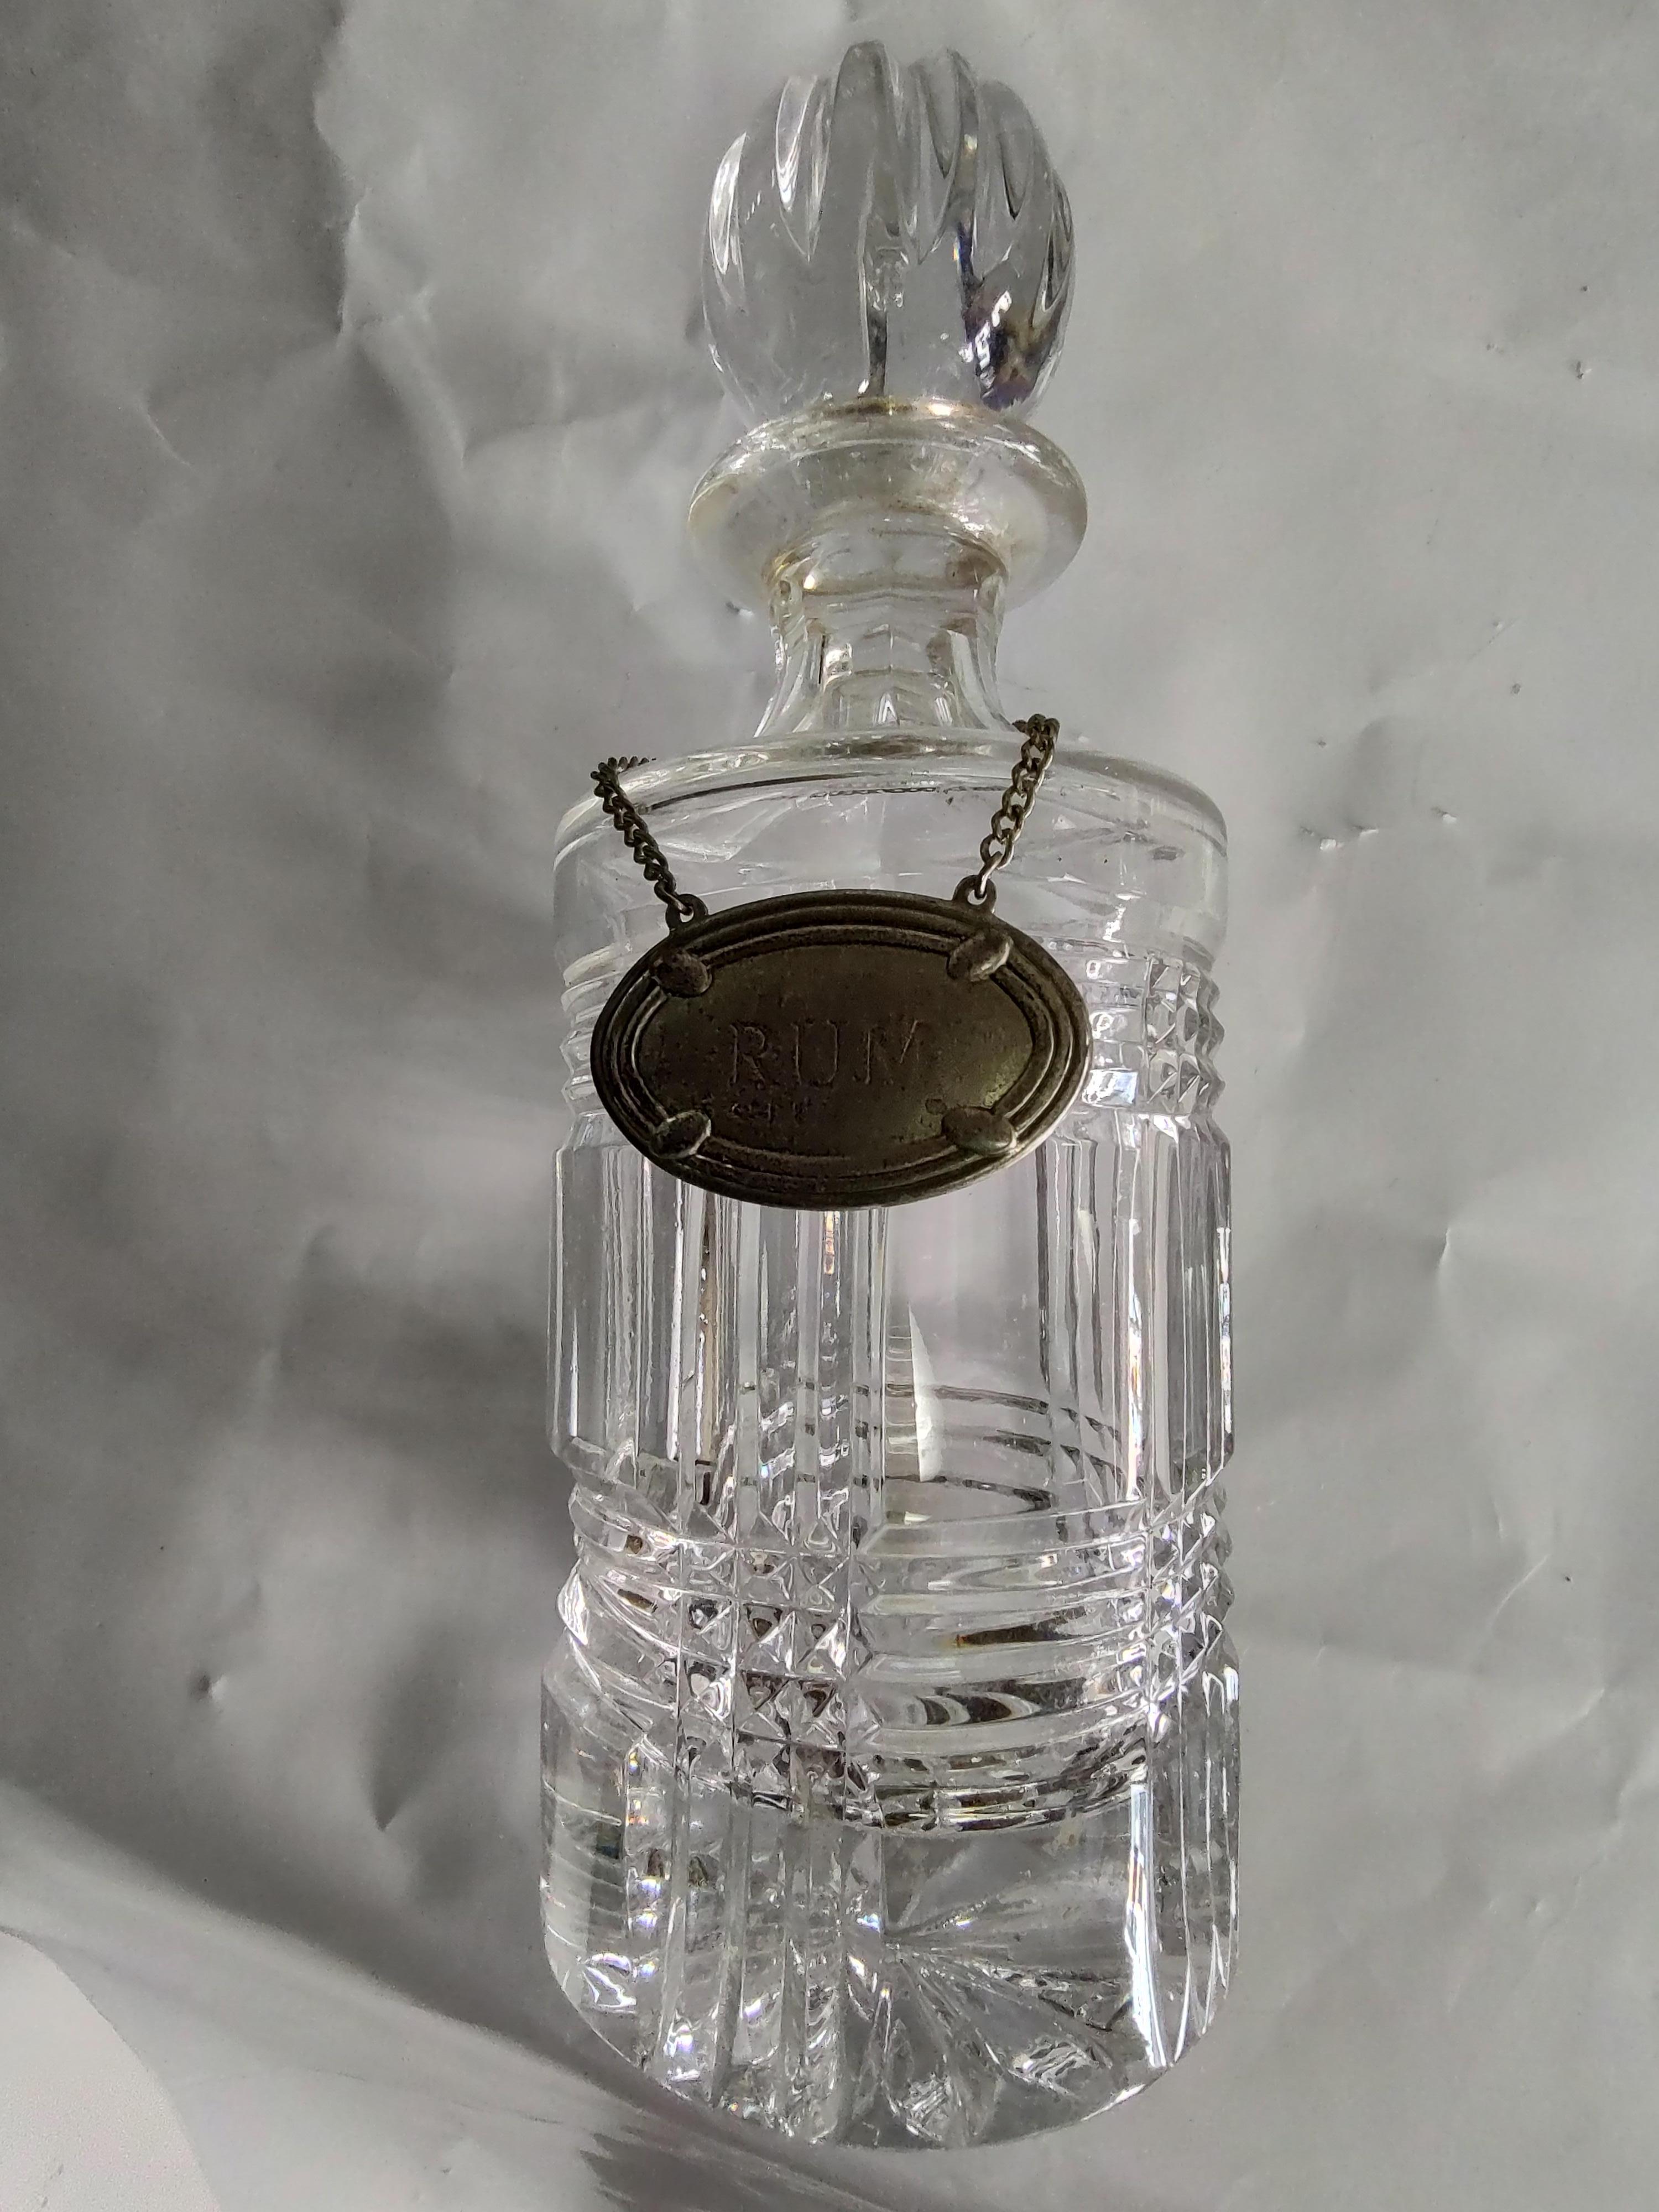 Polished Cut Glass Liquor Decanters with Decorative Tags 3 available 